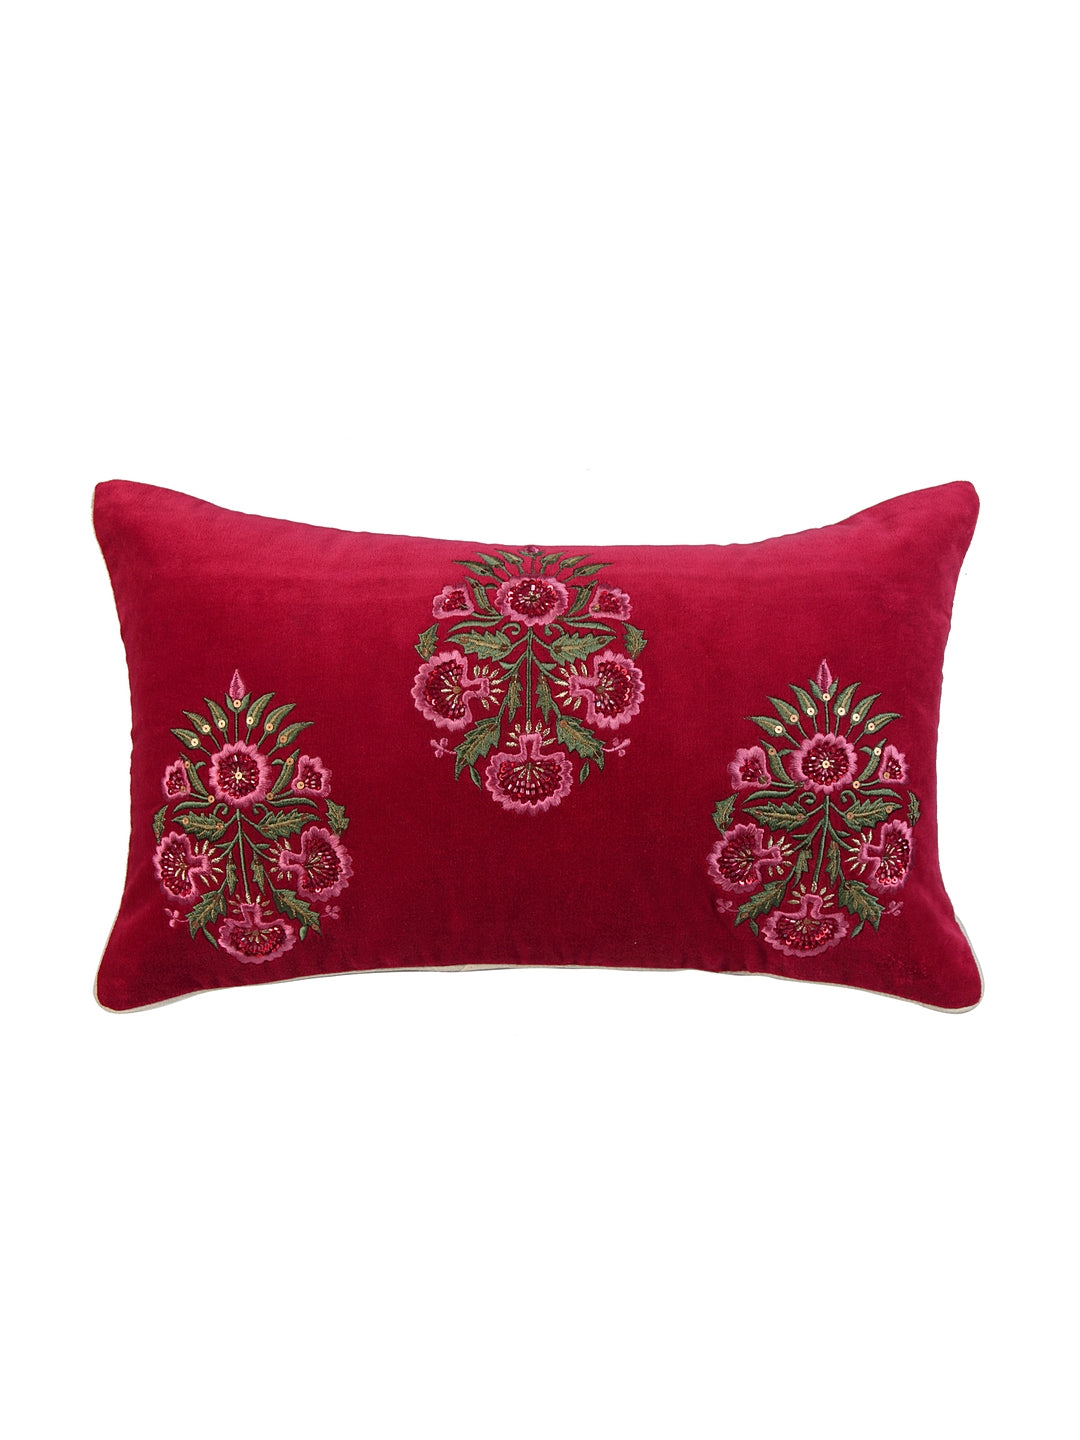 Arabesque Cushion Cover with Filler 30x50cm